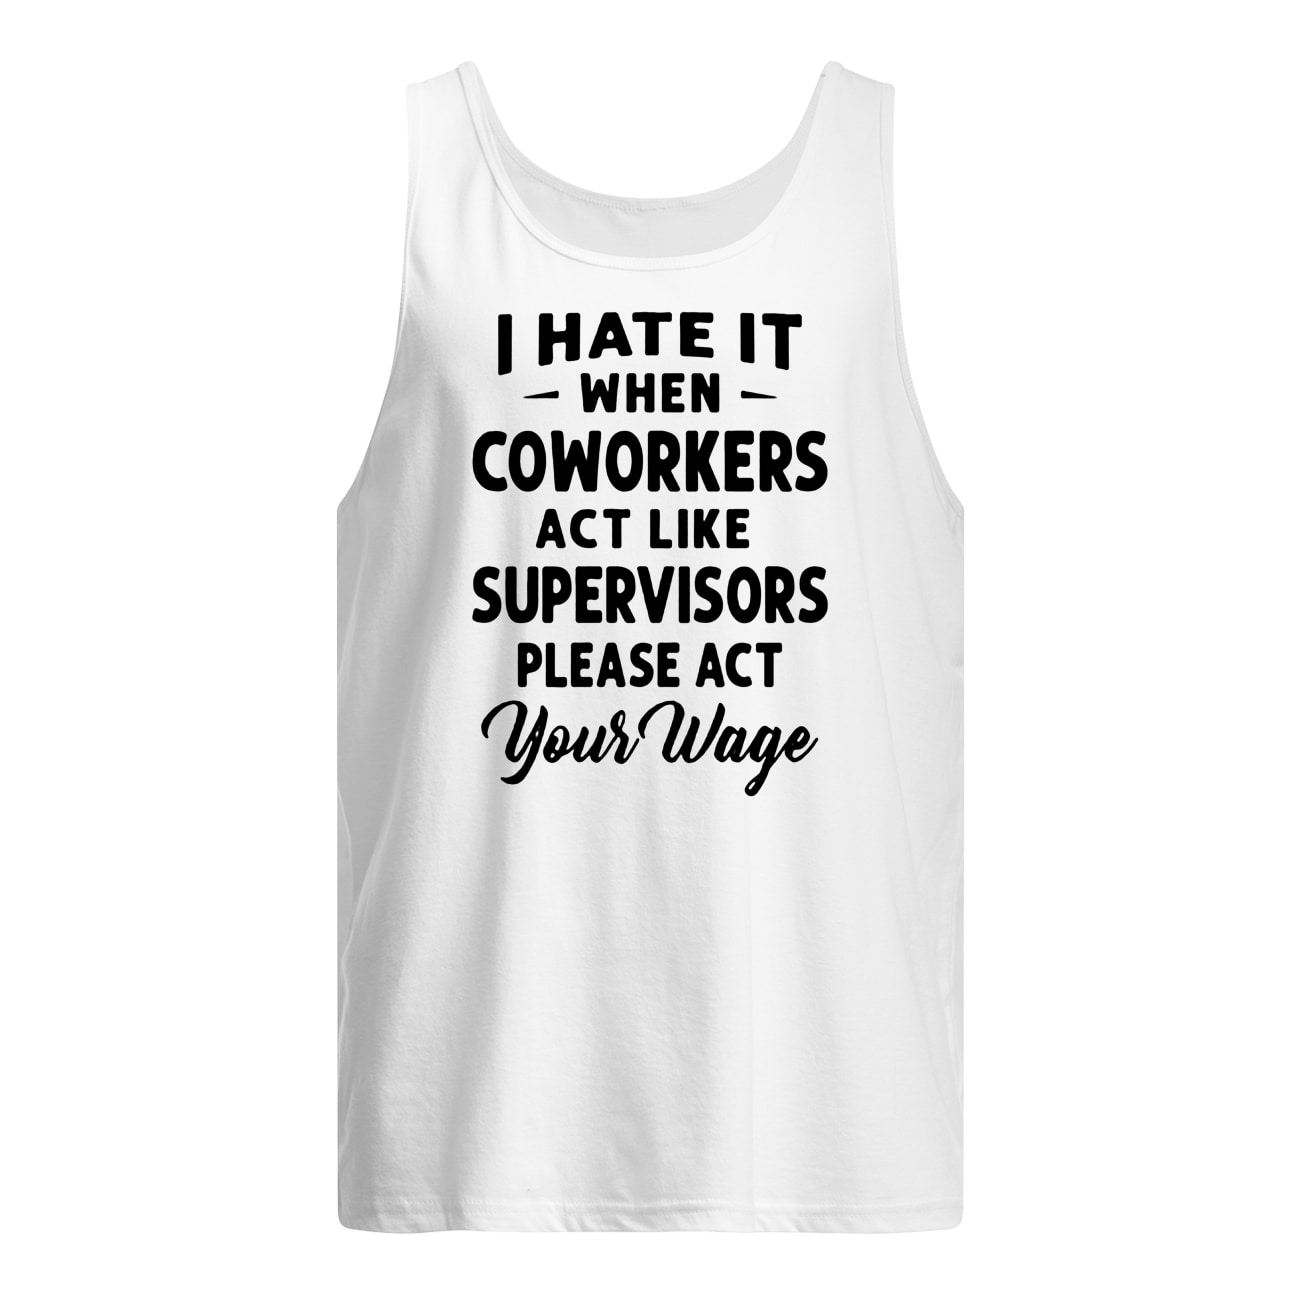 I hate it when coworkers act like supervisors please act your wage tank top